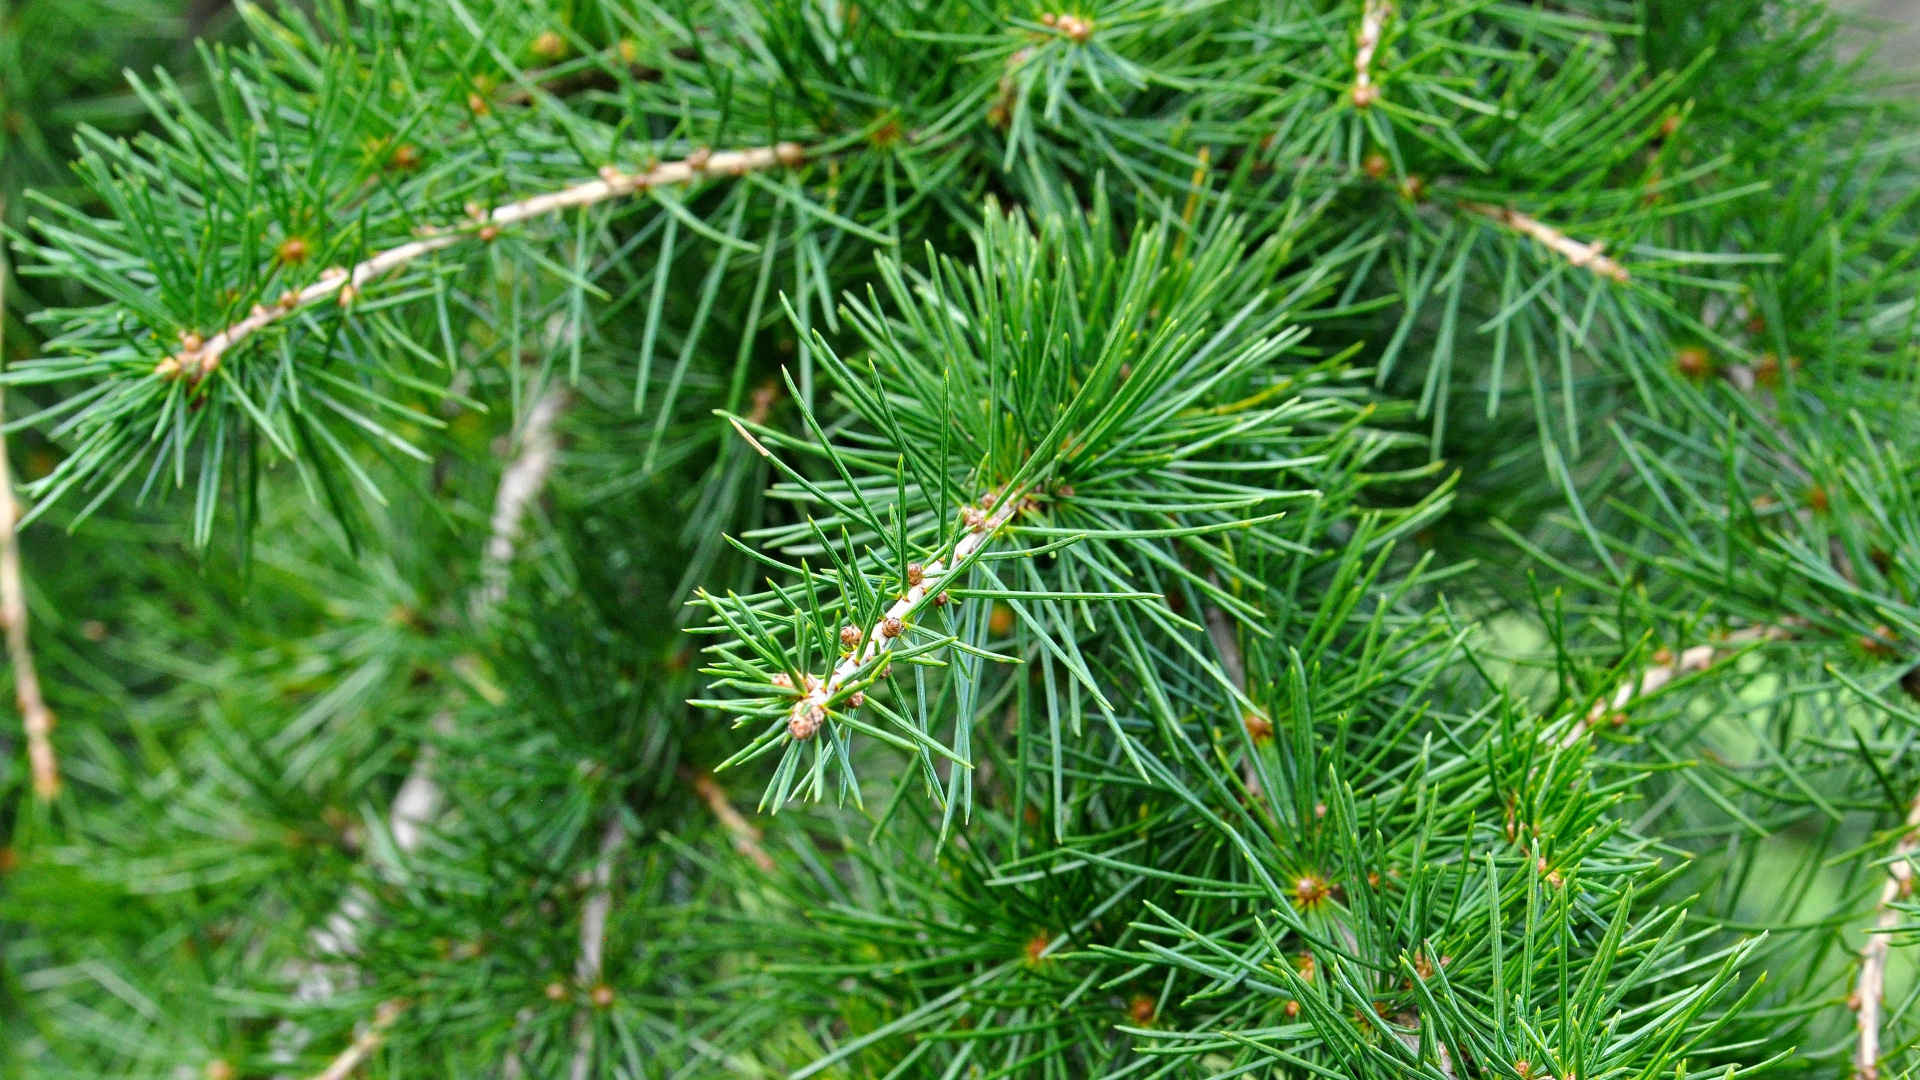 Green Pine Tree in Close up Photography. Wallpaper in 1920x1080 Resolution